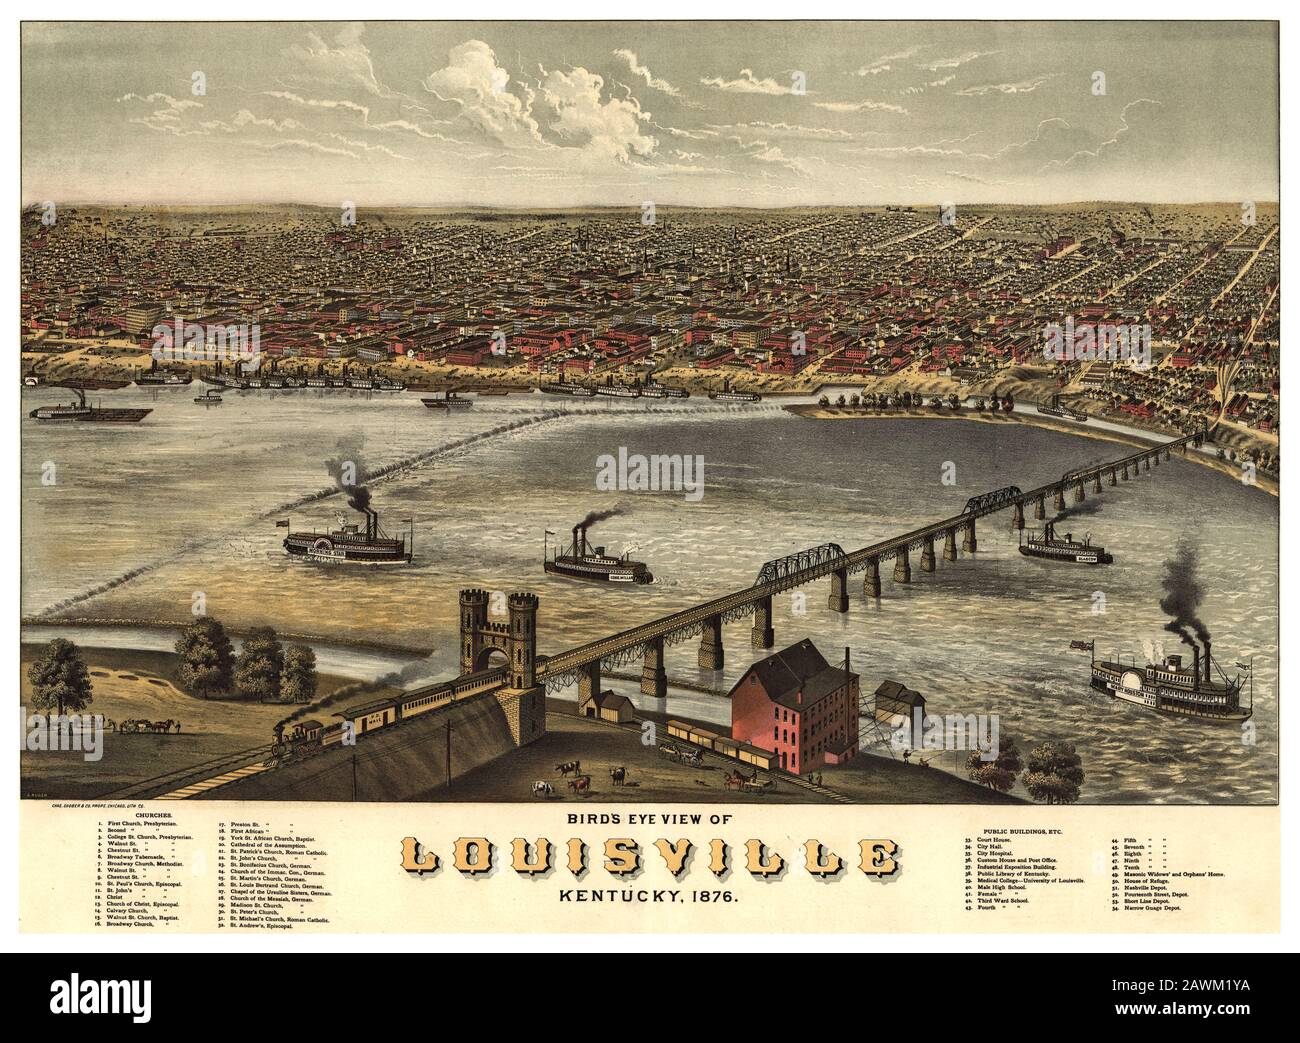 Vintage LOUISVILLE Kentucky poster high resolution illustration 1876 Lithograph Birds Eye View with prominent buildings annotated Stock Photo